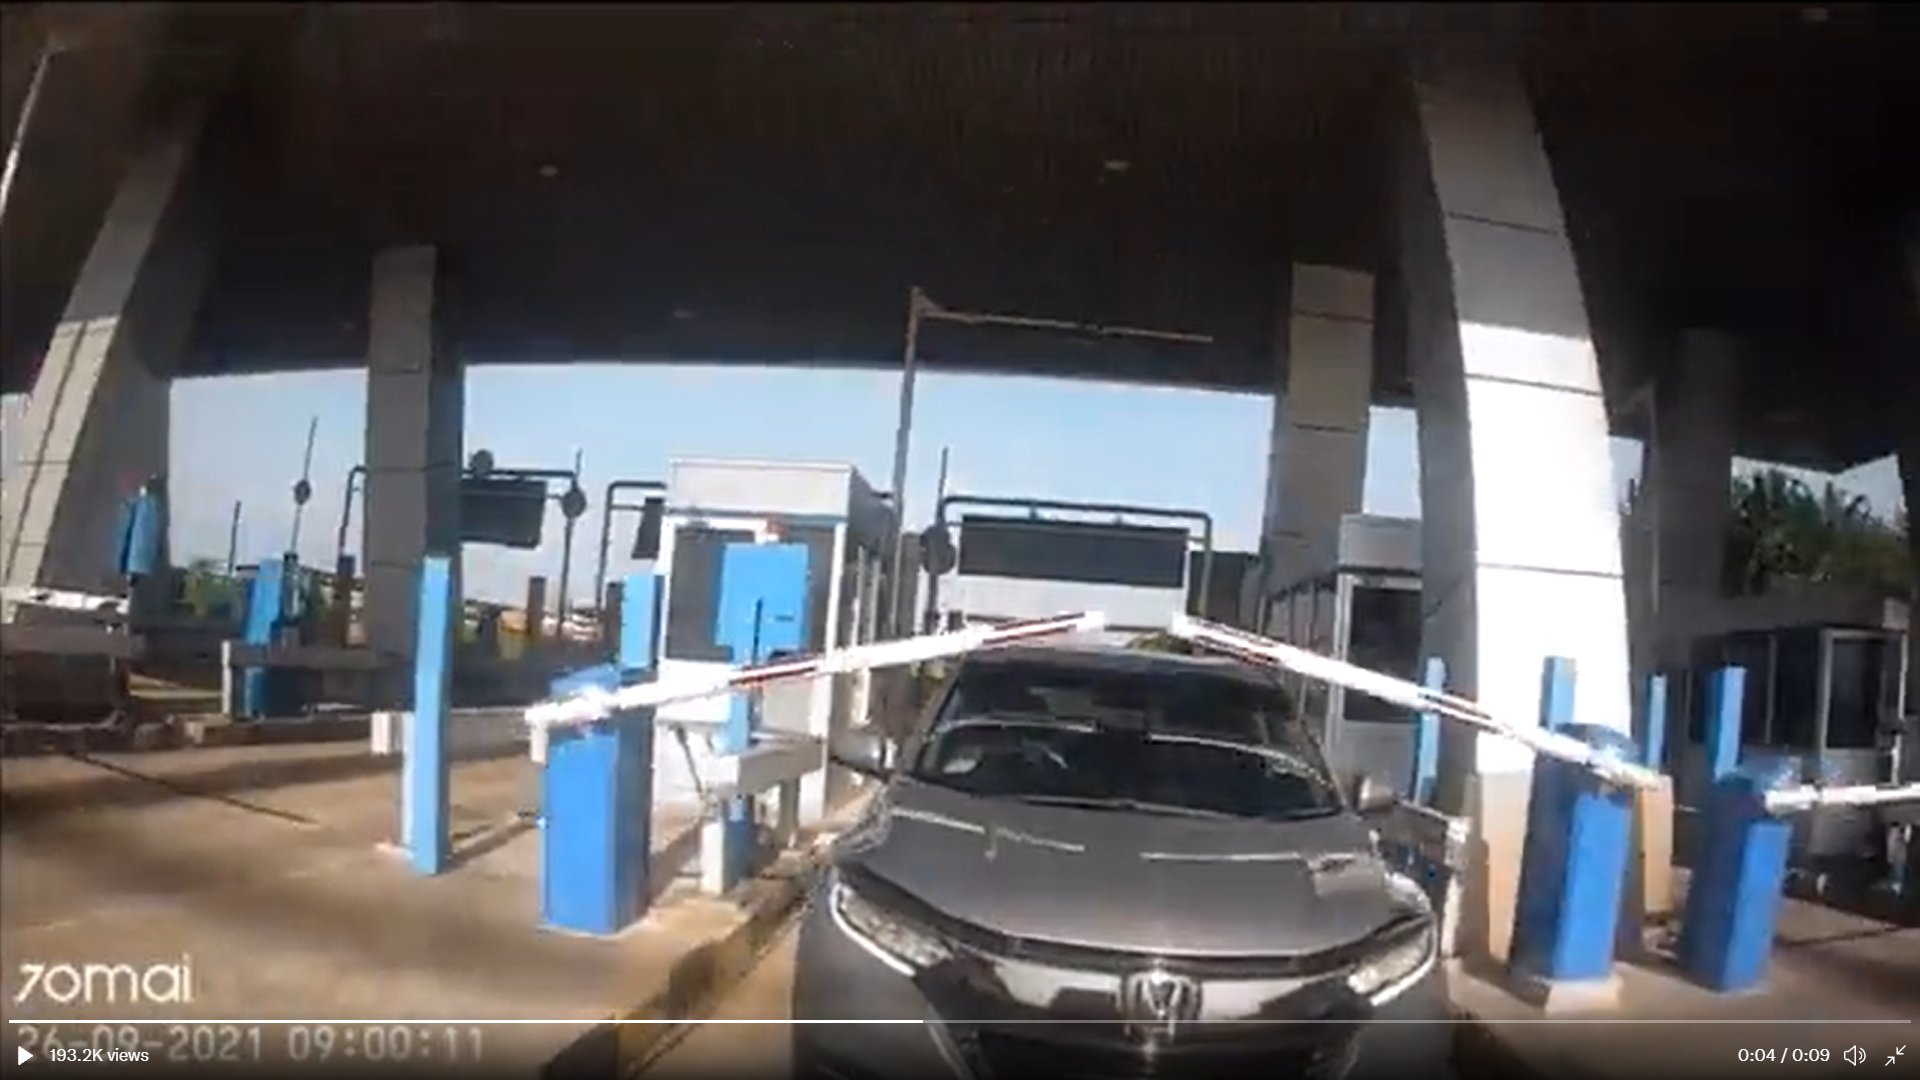 Honda tailgates woman and hits barricade while avoiding paying the toll fee